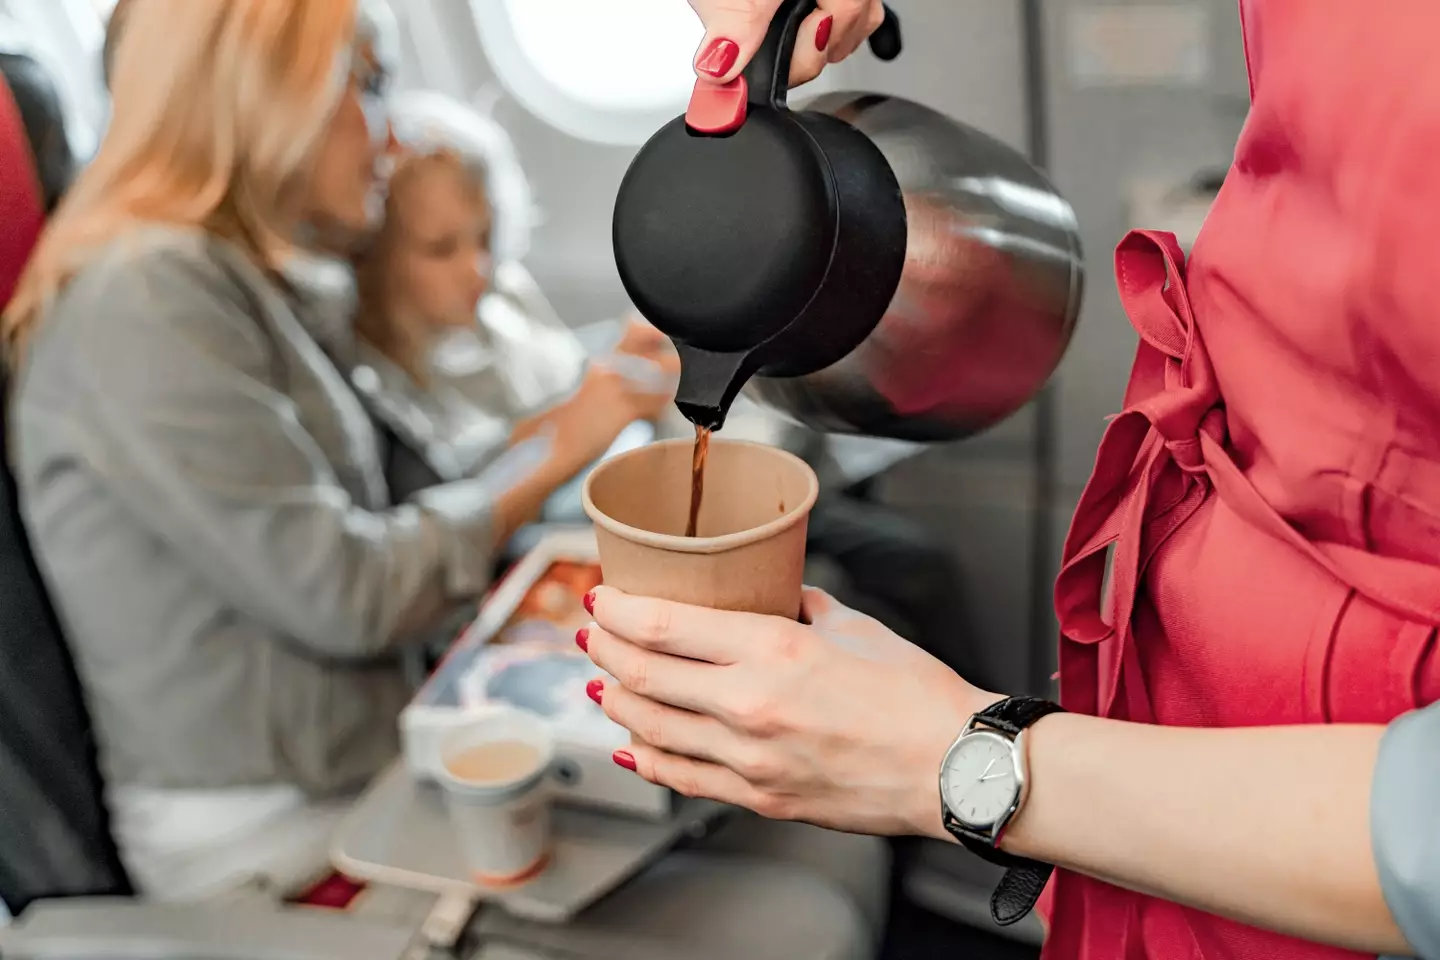 You probably won't drink coffee on a plane again after hearing this.